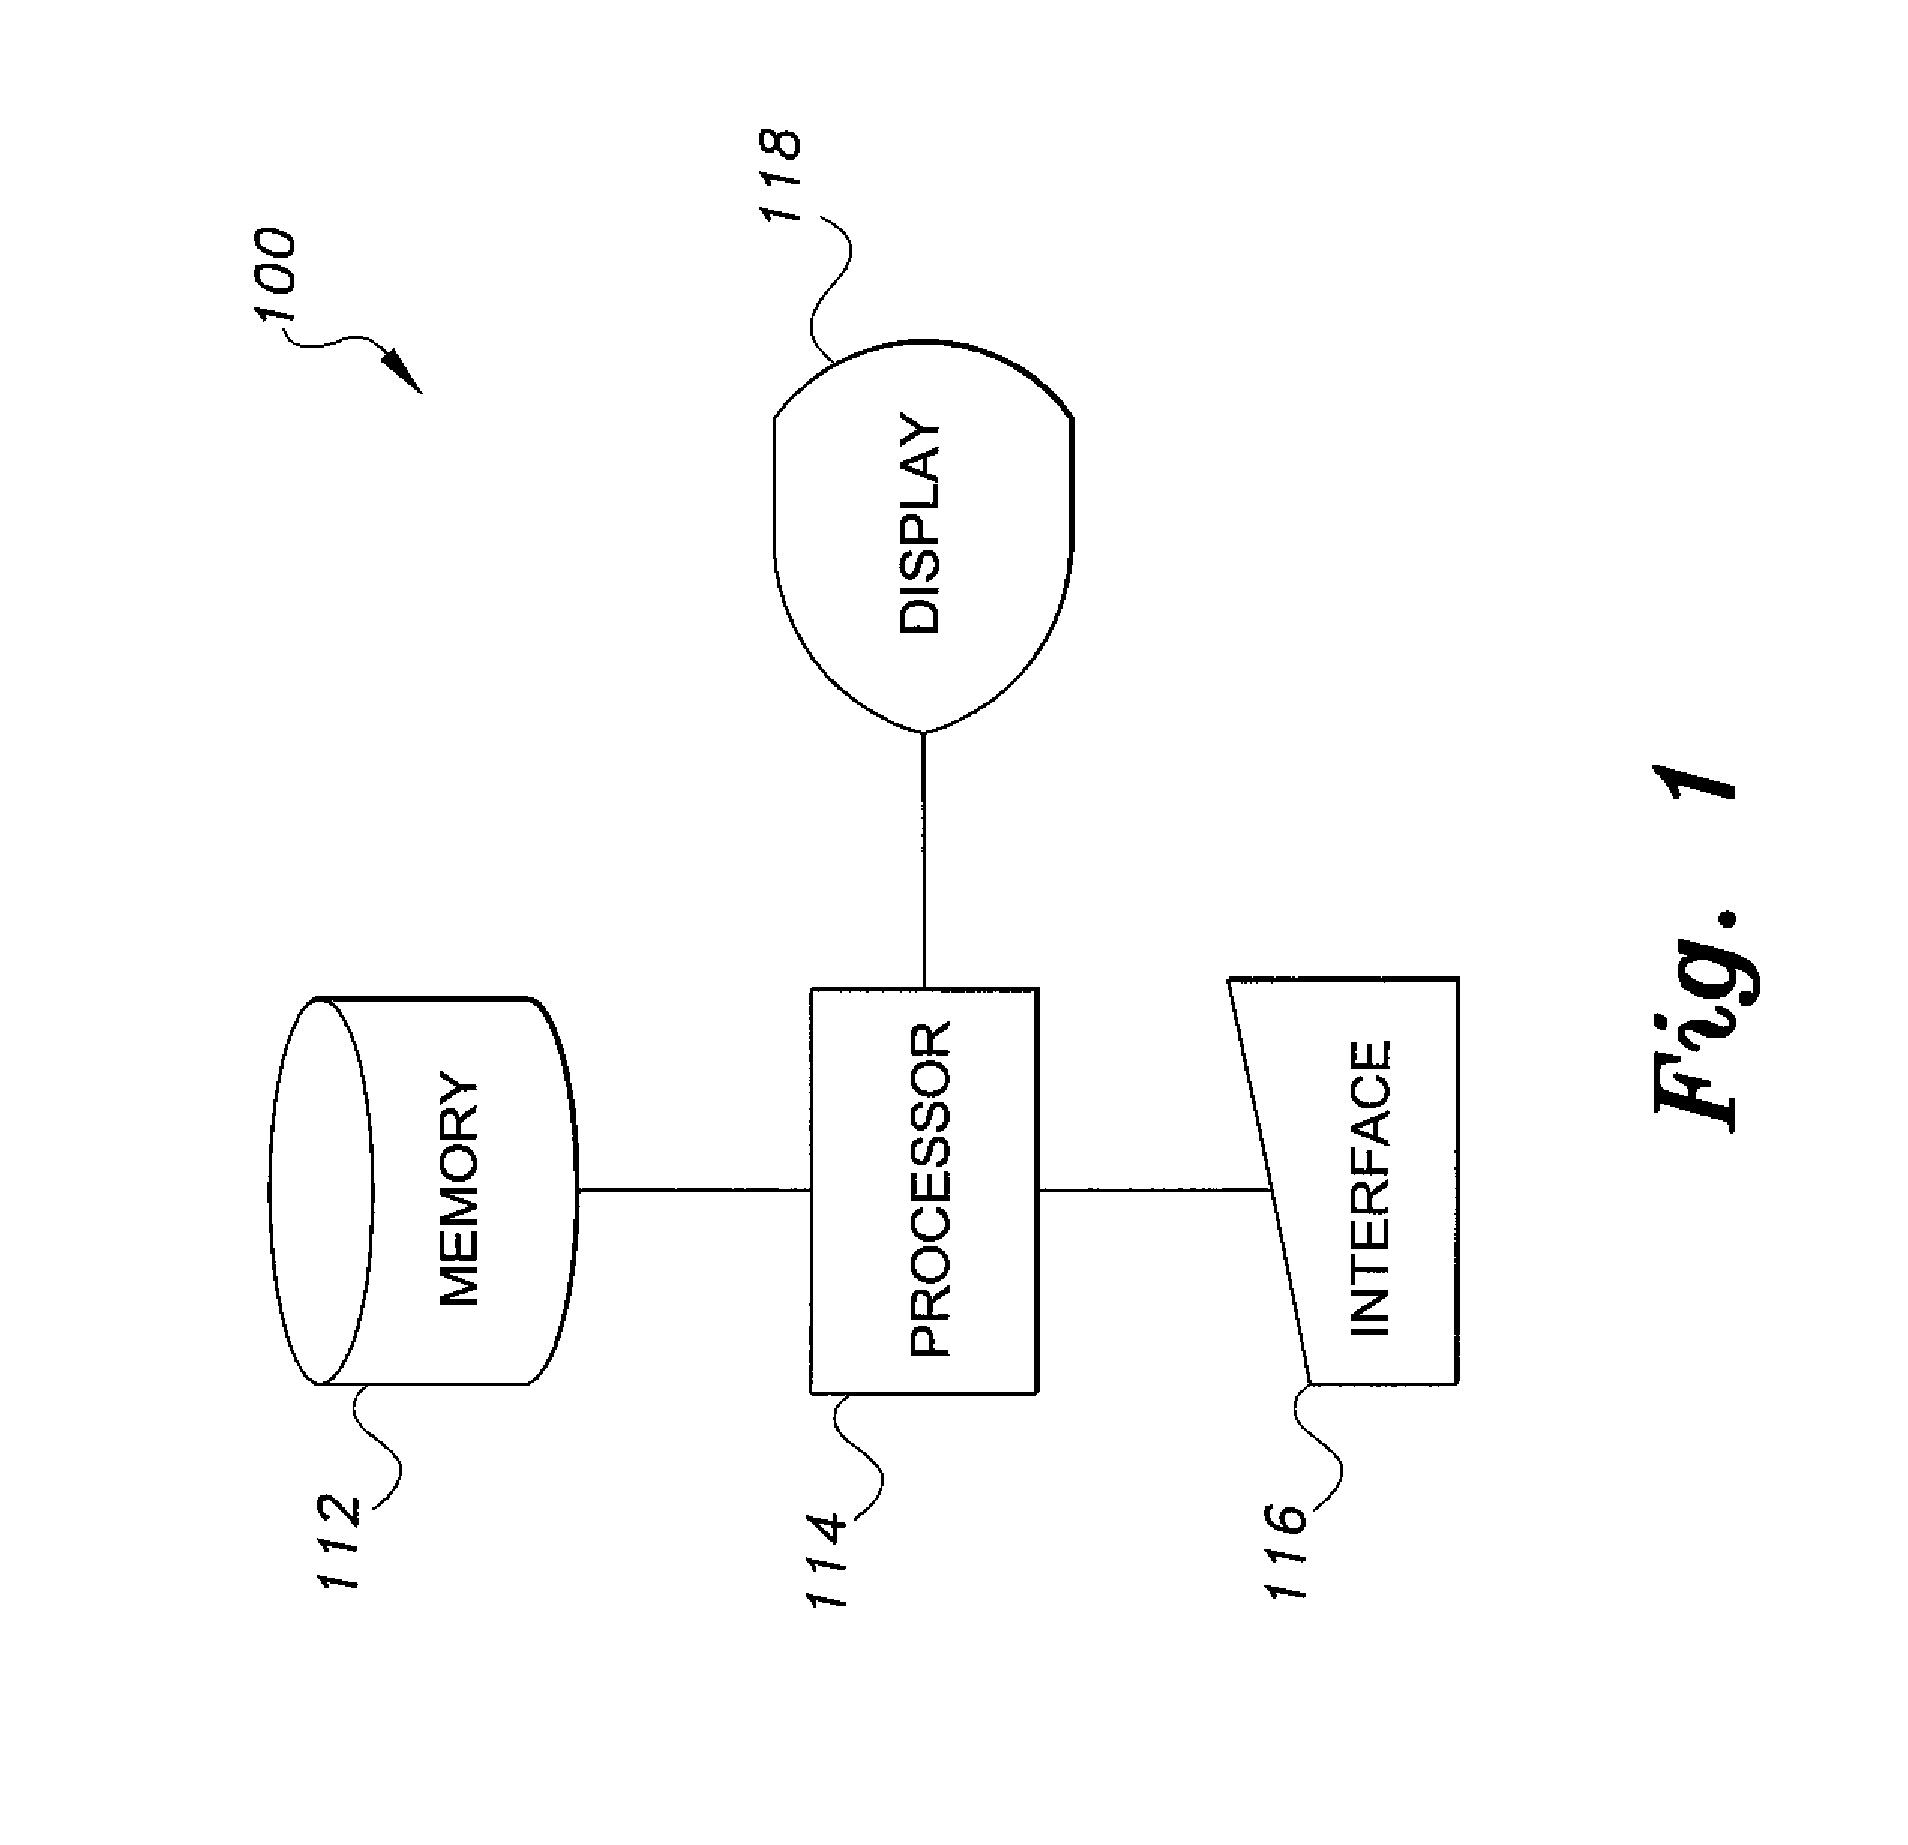 Method of performing structure-based bayesian sparse signal reconstruction